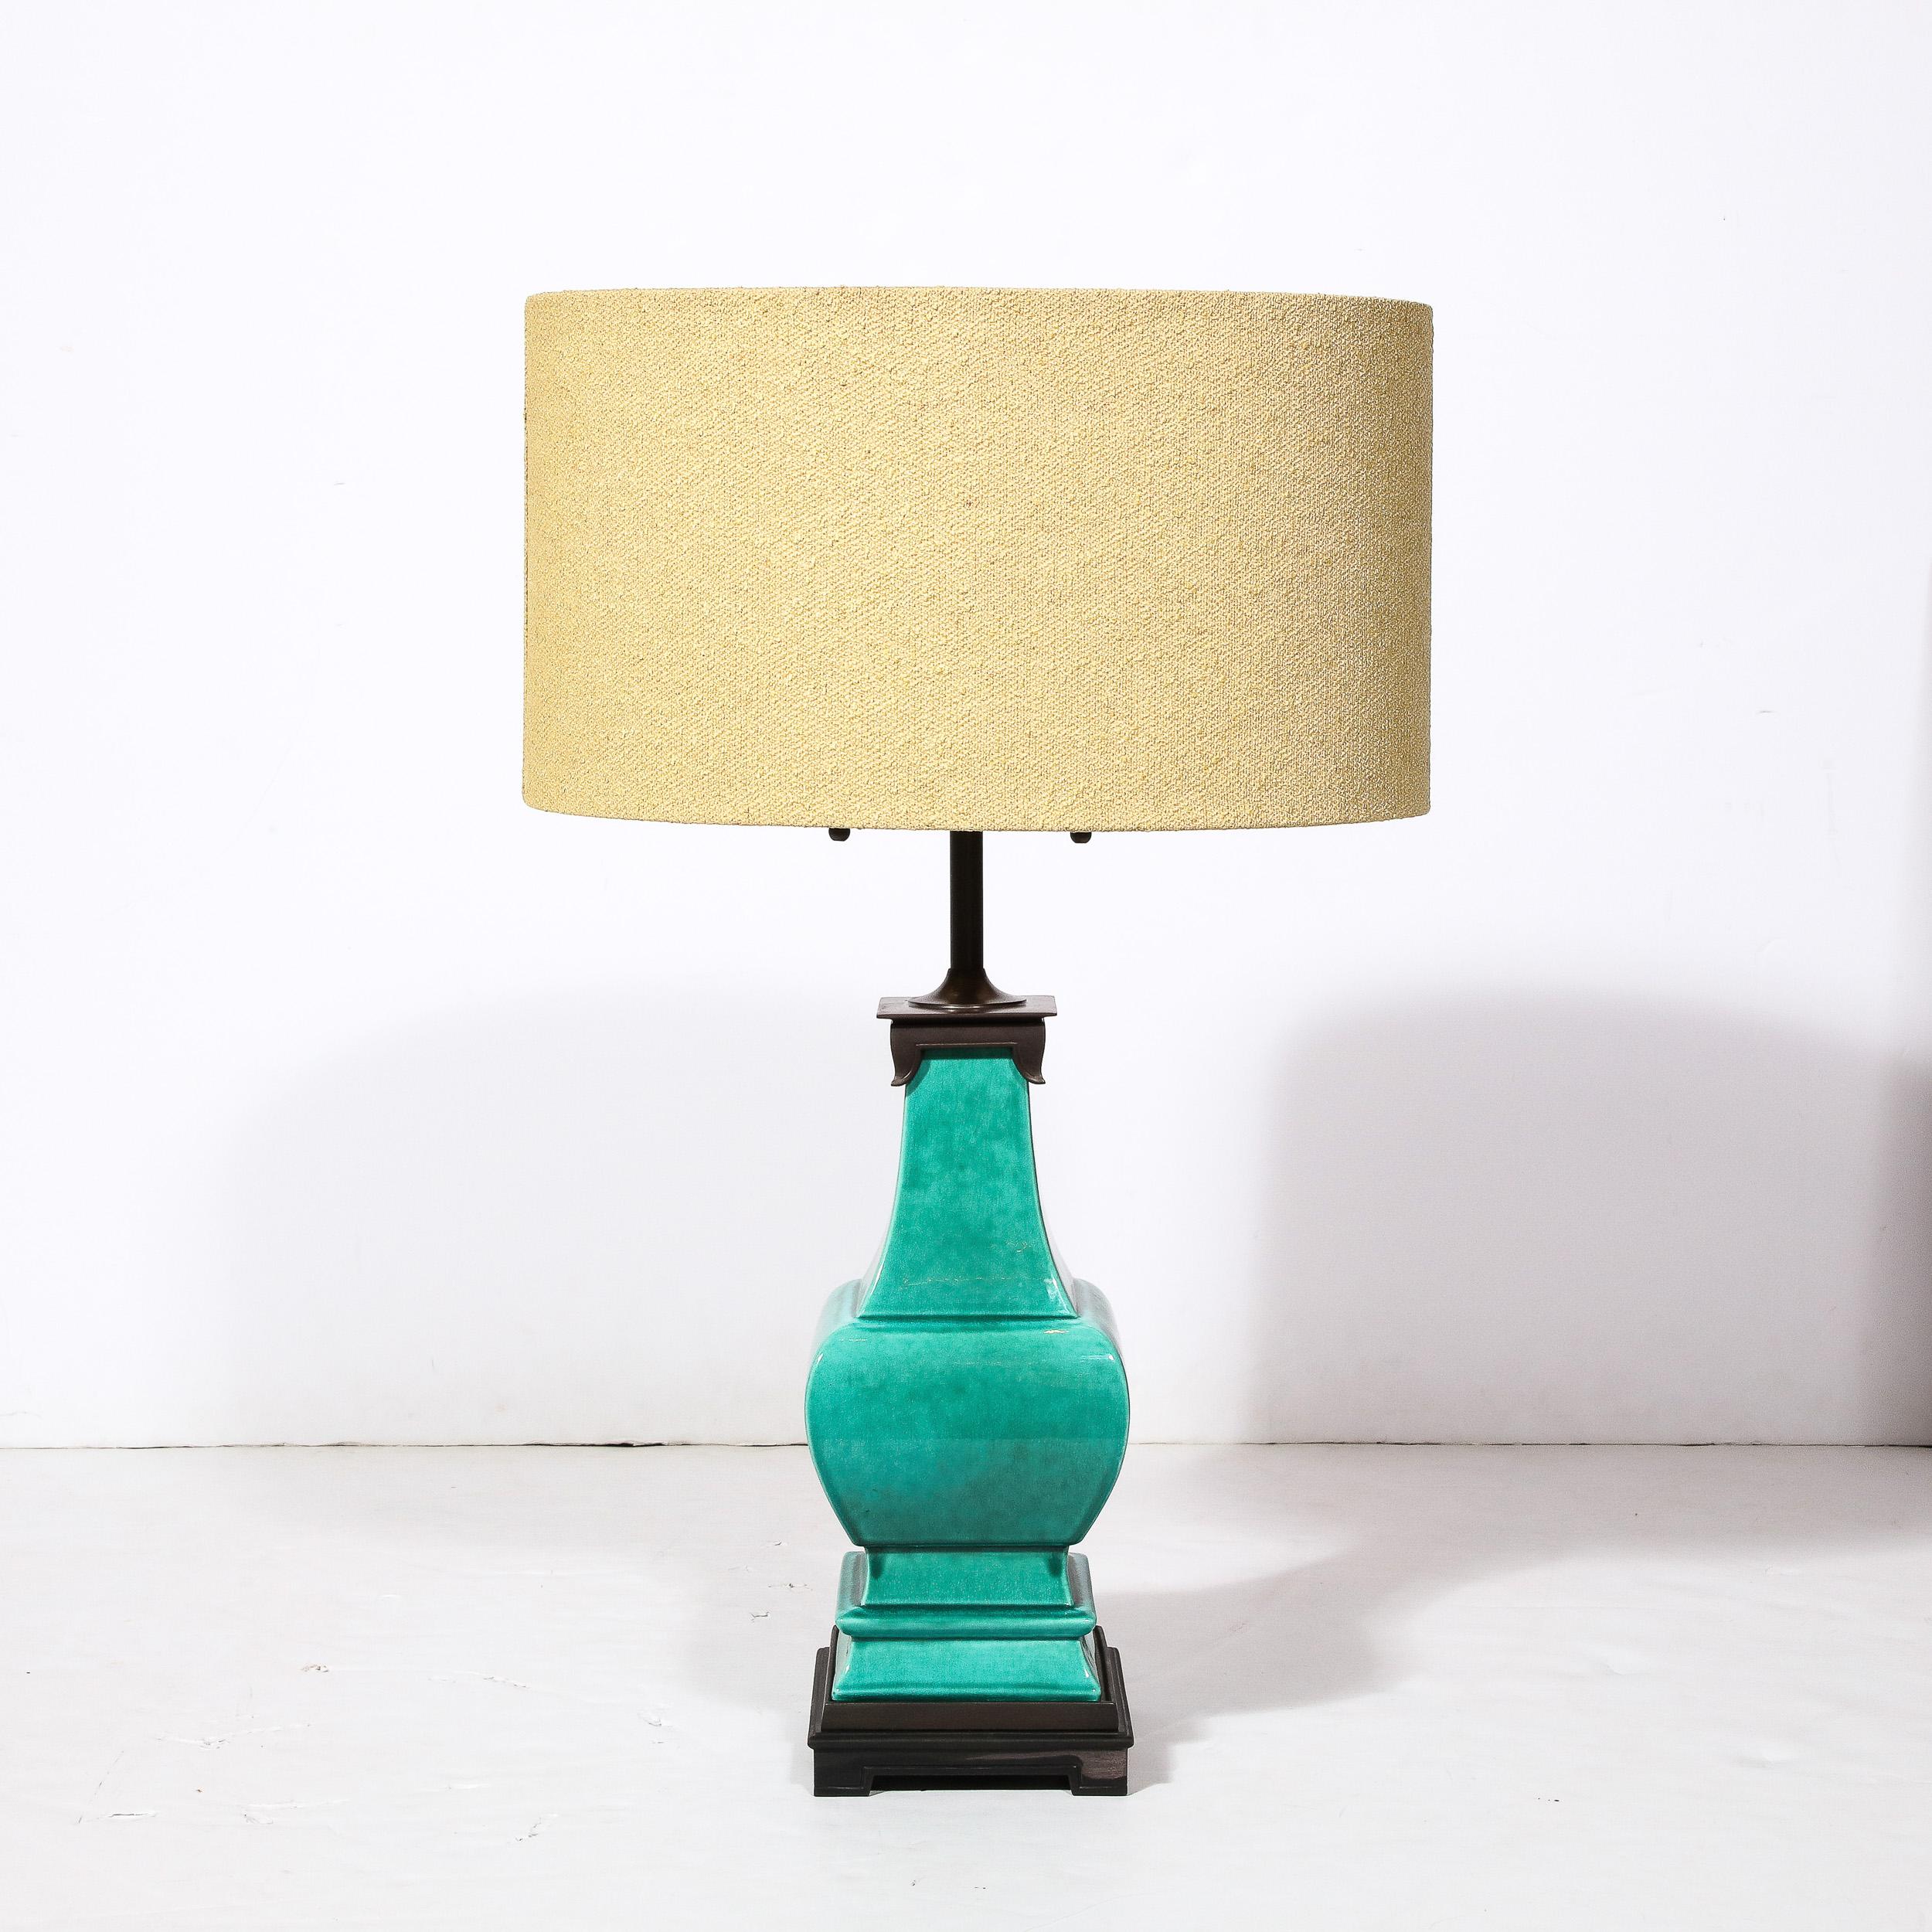 This Pair of Turquoise Jade Table Lamps originate from the United States circa 1960,. In a beautiful and calming hue of green ceramic, these pieces are fitted at the top and bottom of their curved and tiered architectural profile with oil rubbed